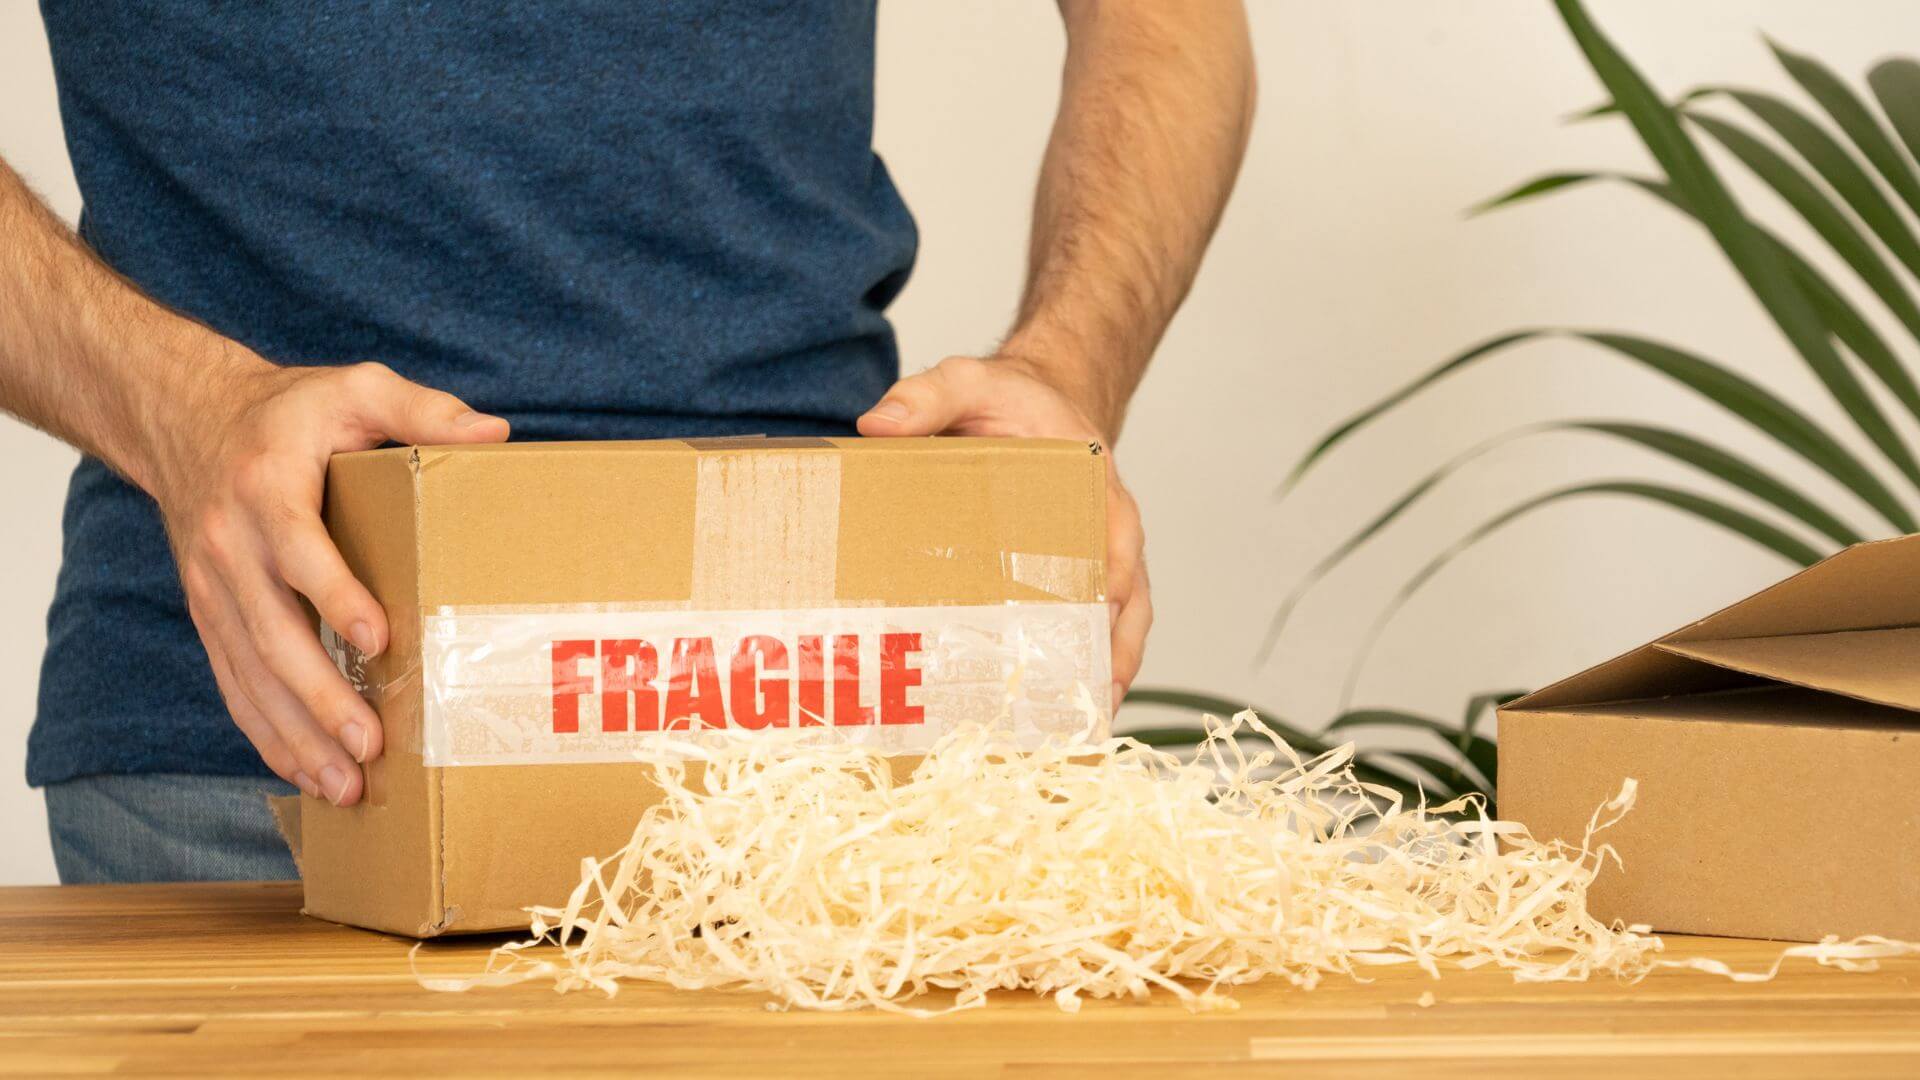 Packaging items. Fragile goods. Fragile Set mm2. Fragile. There are Breakable items in the Suitcase..